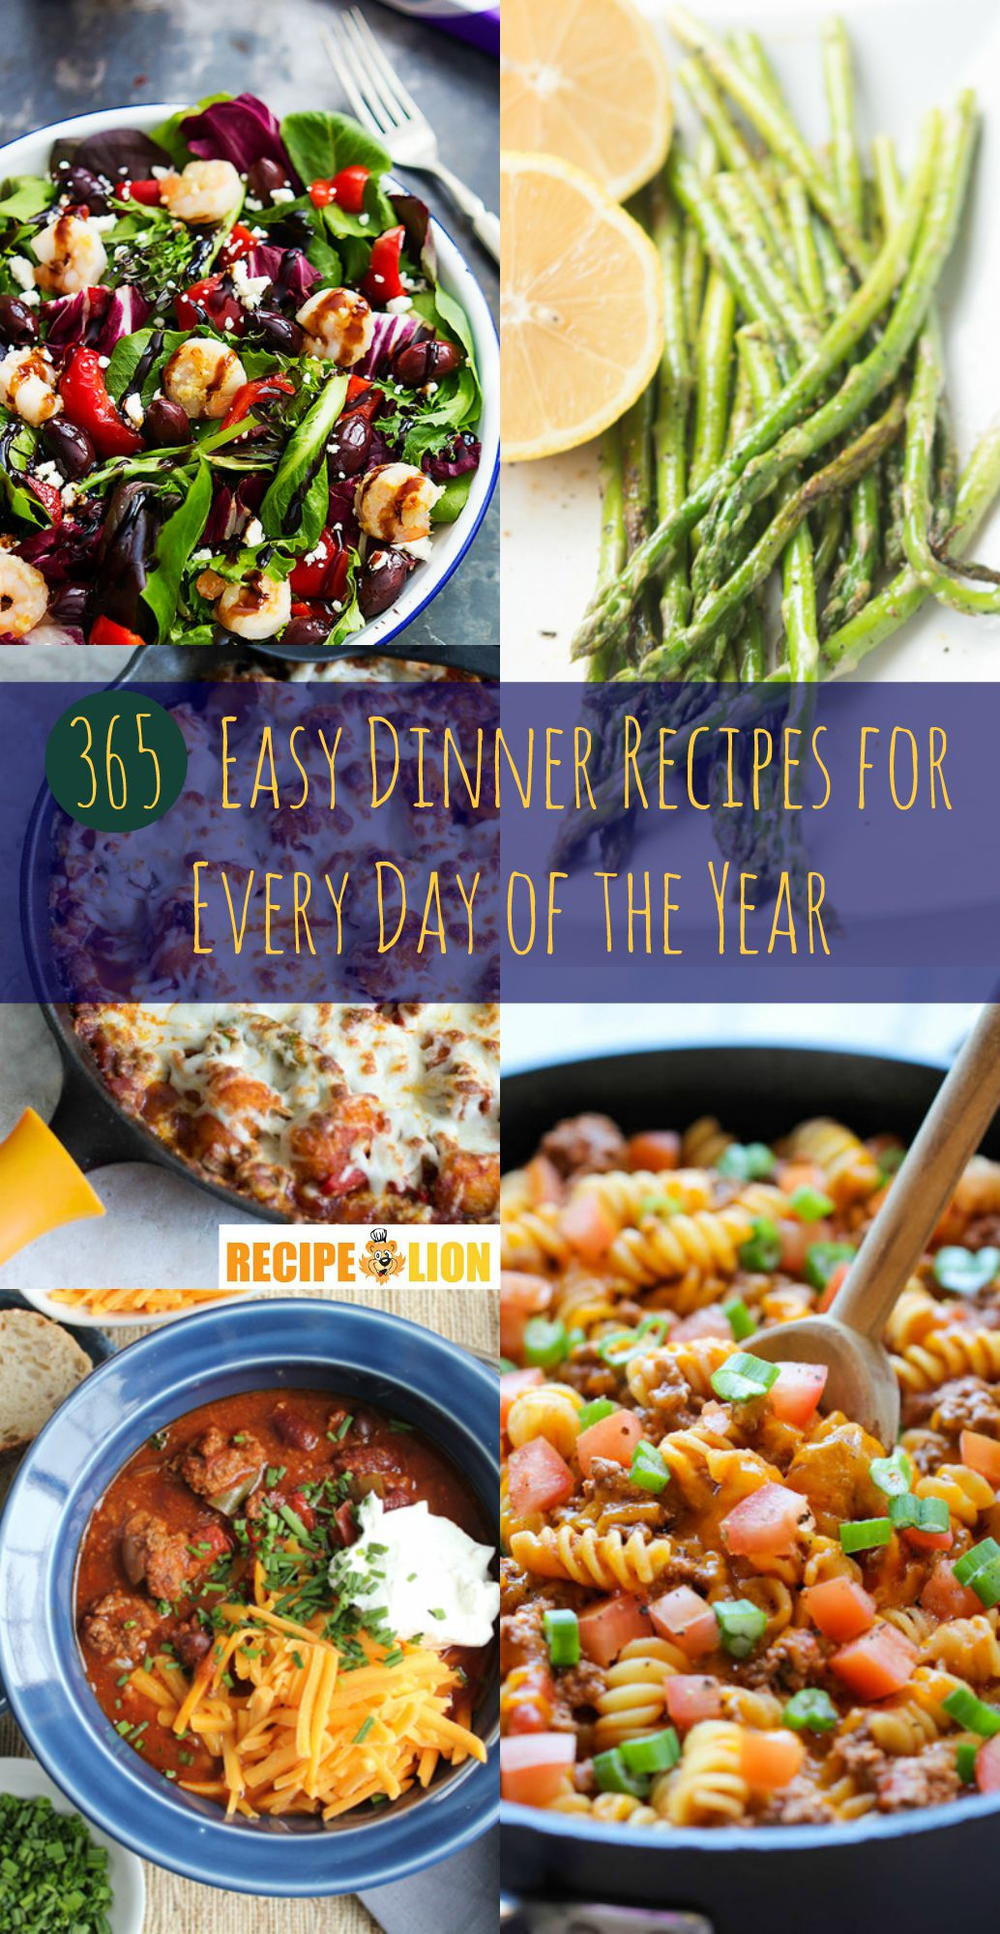 365 Easy Dinner Recipes for Every Day of the Year